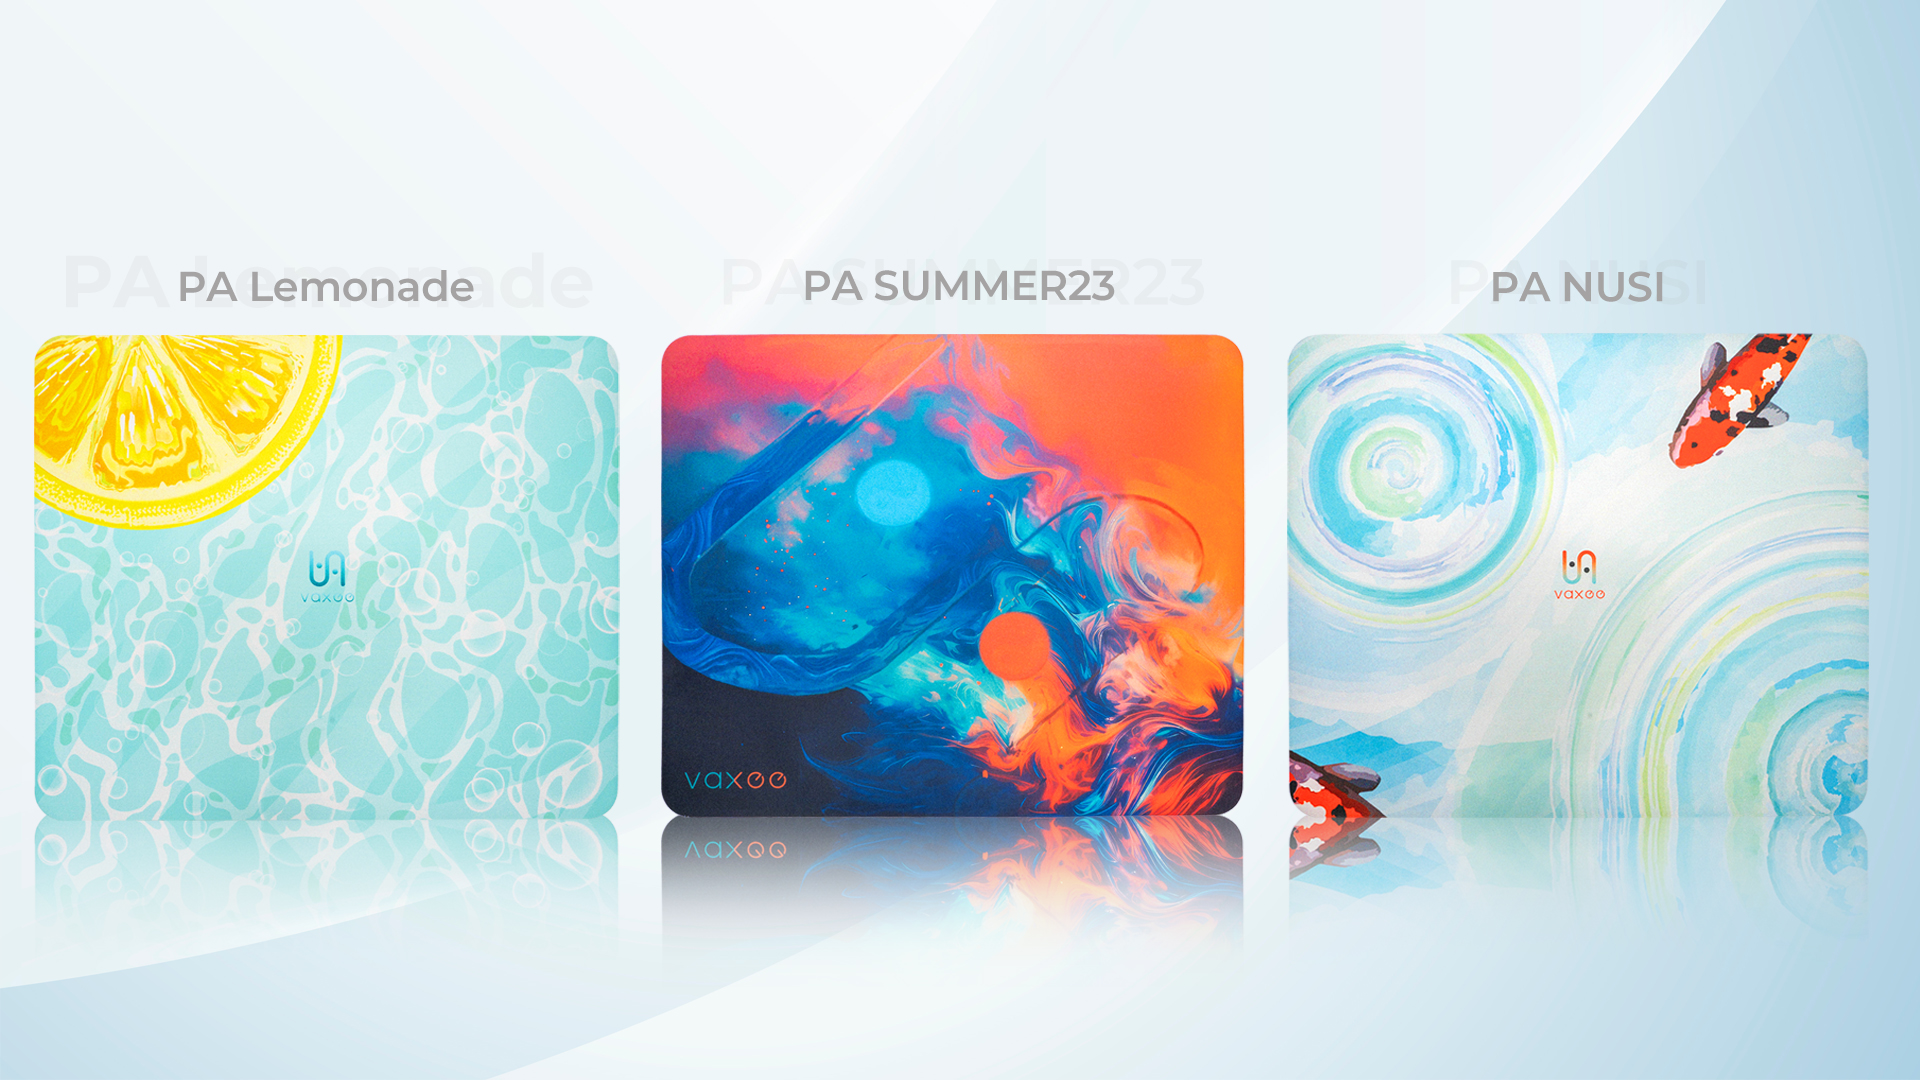 Summer23 submissions event mousepad will soon be available for